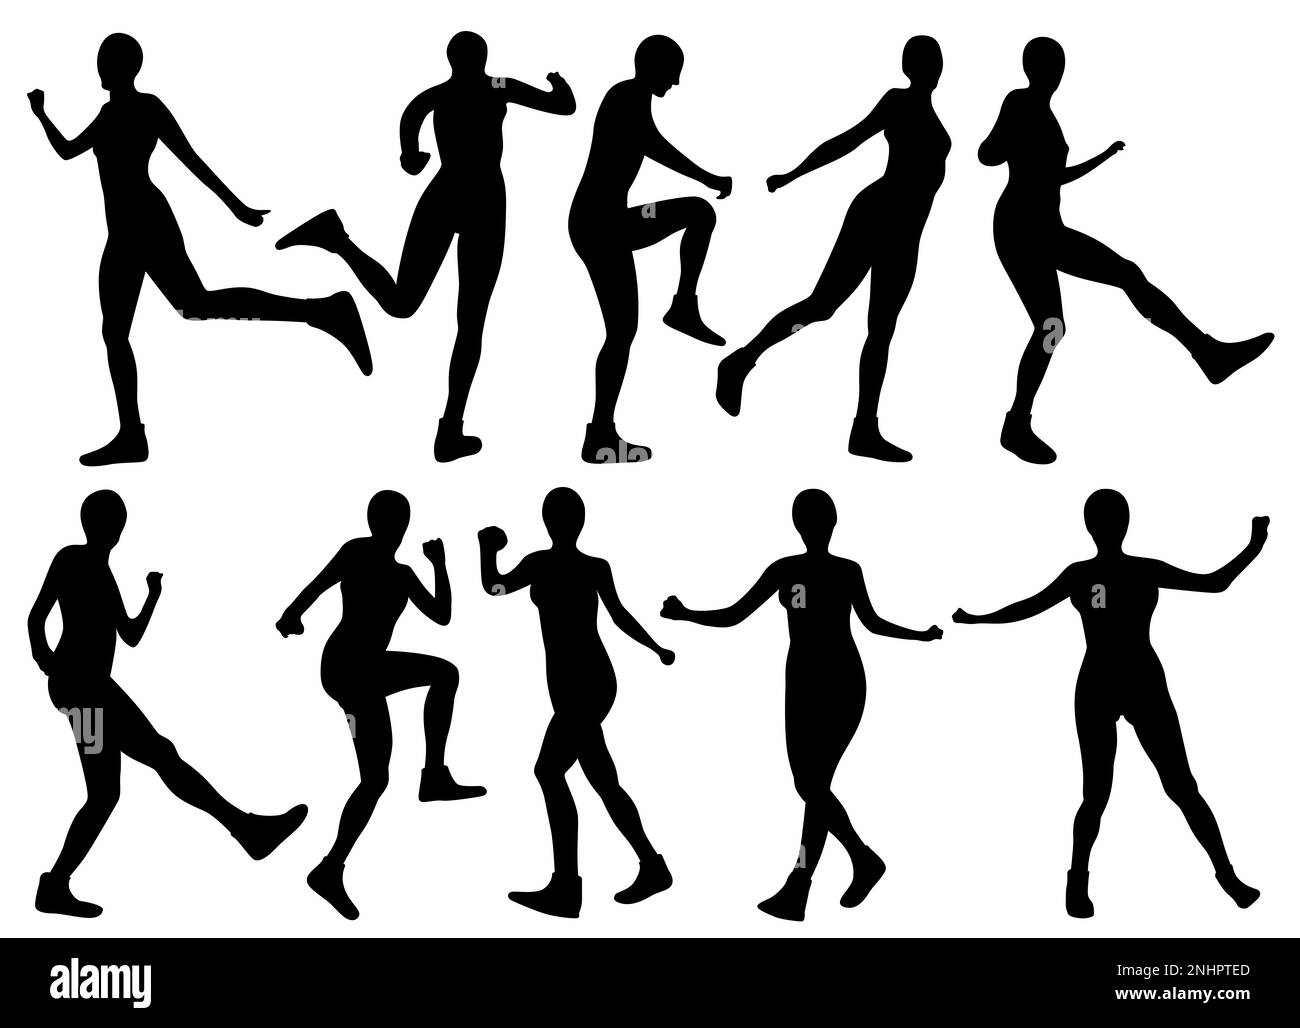 Tutorial steps to the shuffle dance. Clipping Path included for each silhouette. Stock Photo